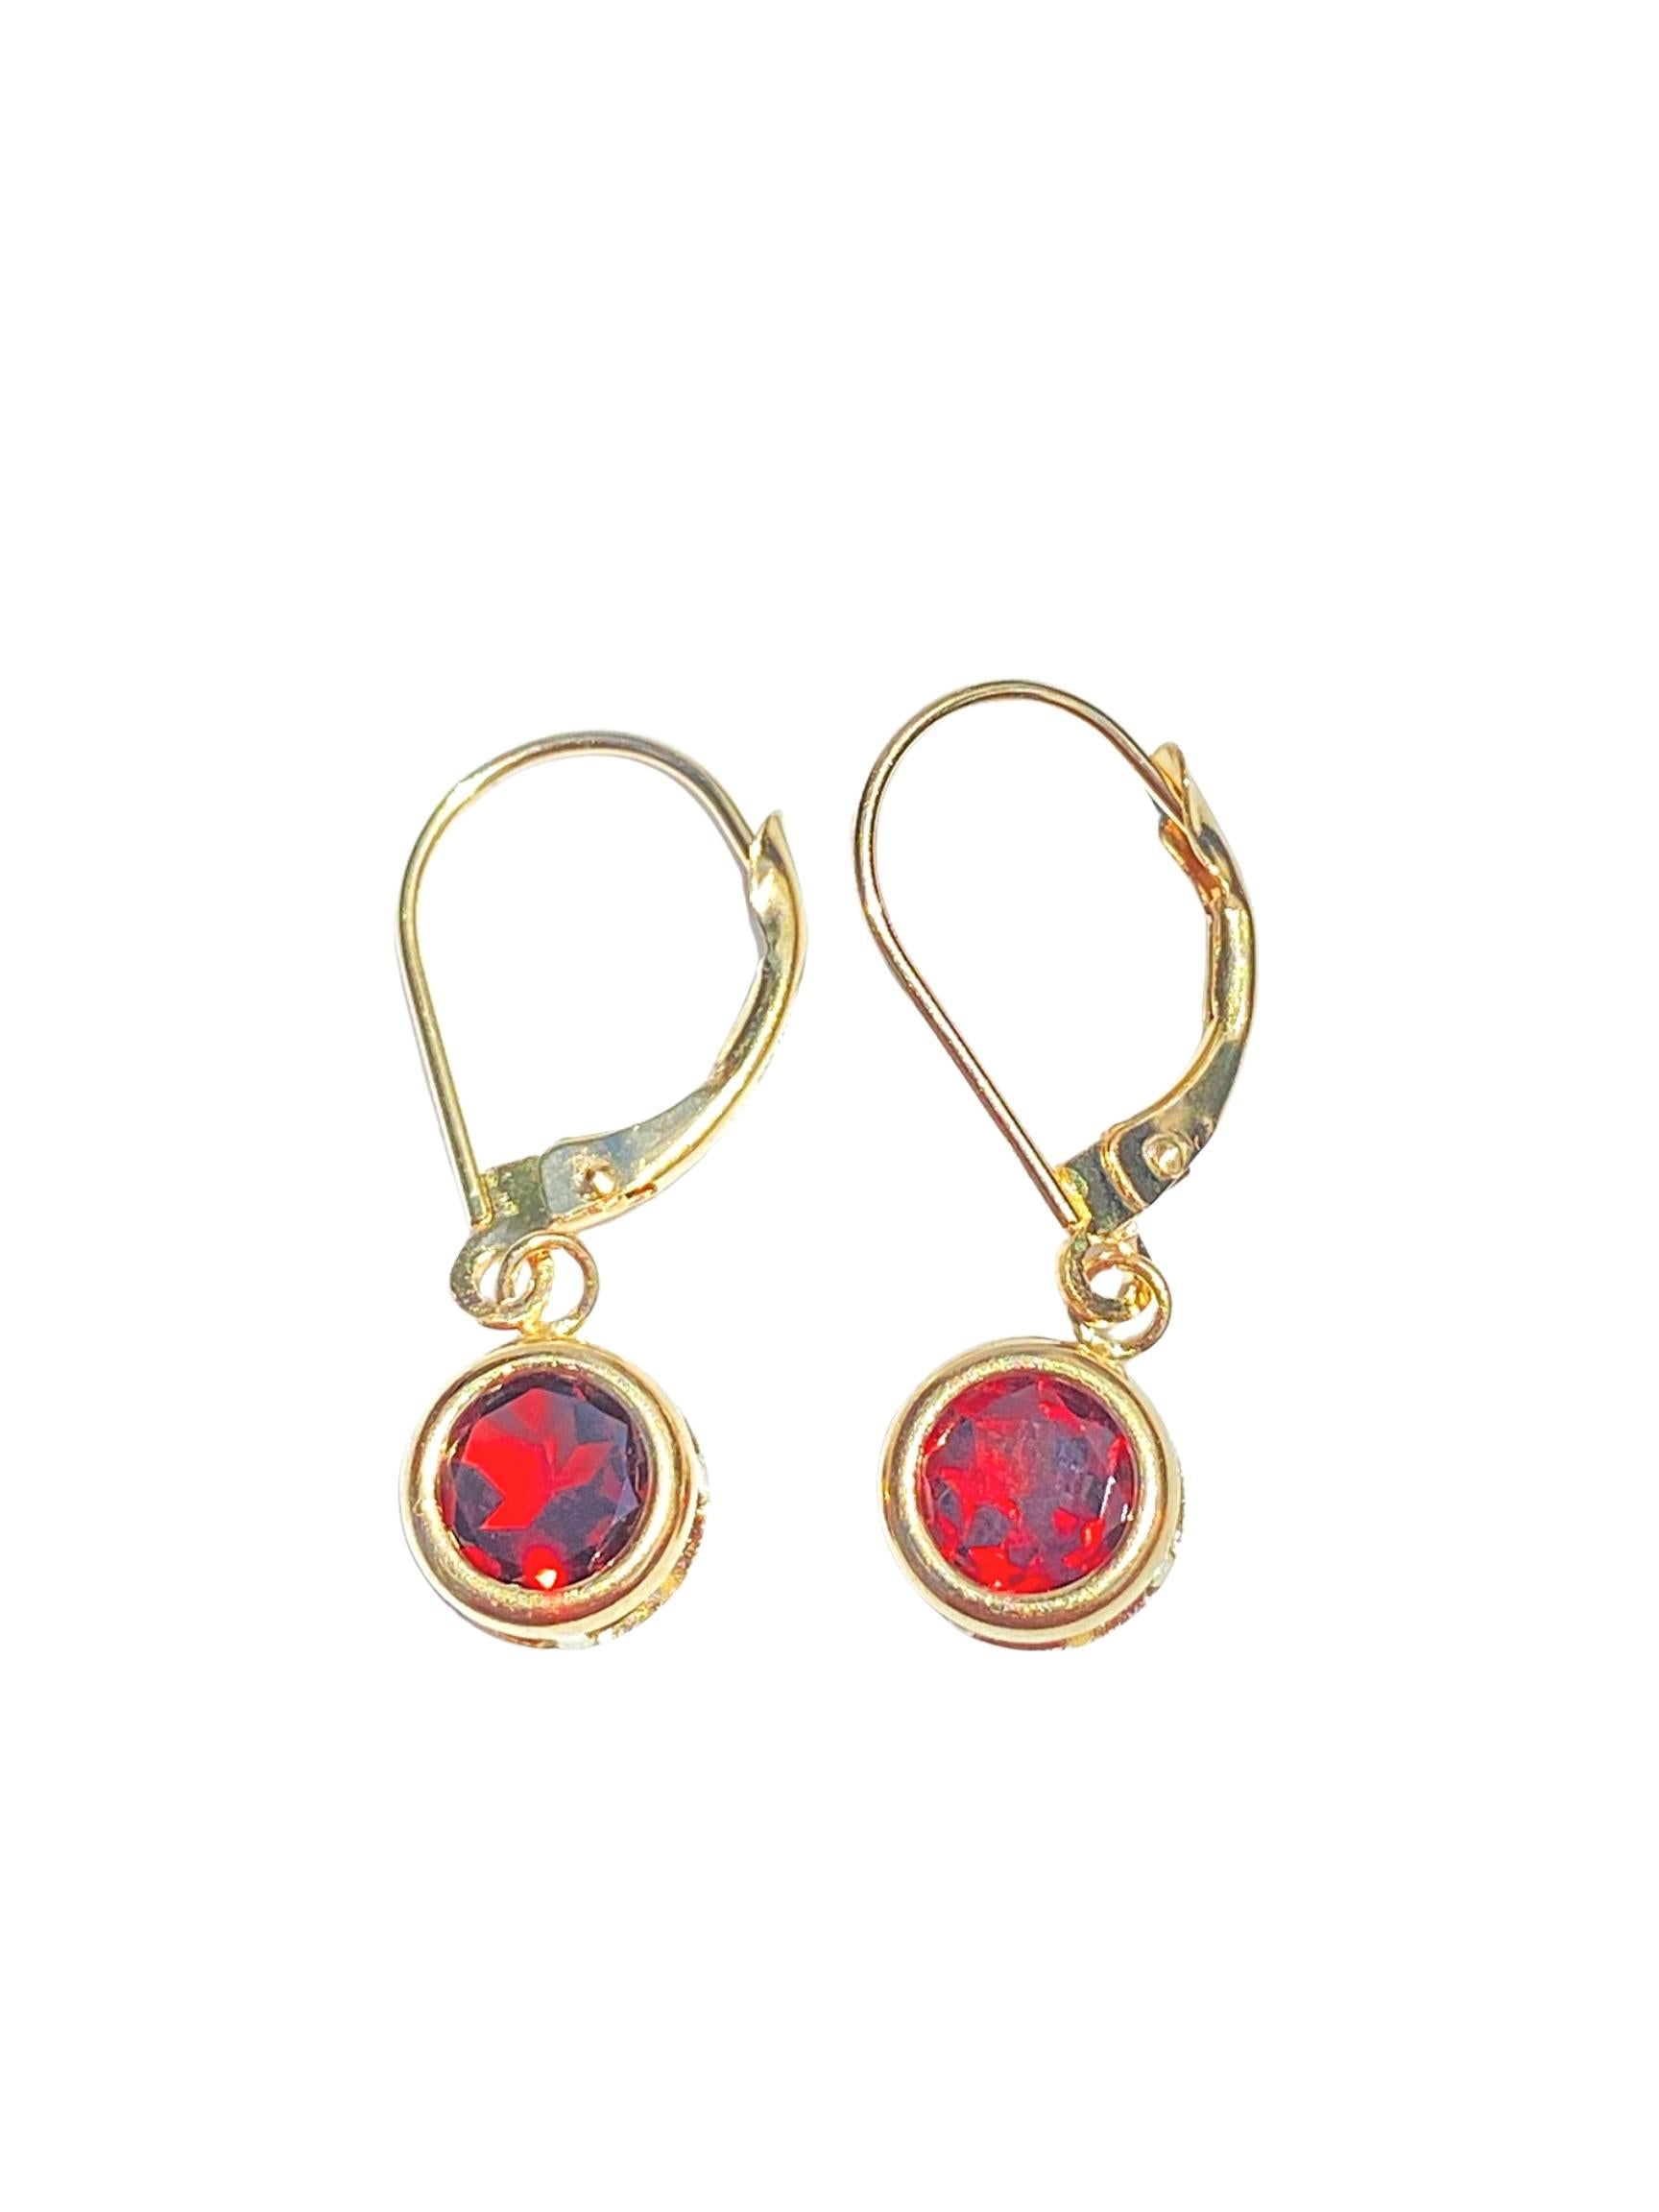 Retro 2.00 Carat Round-Brilliant Cut Red Garnet and 14K Yellow Gold Earrings For Sale